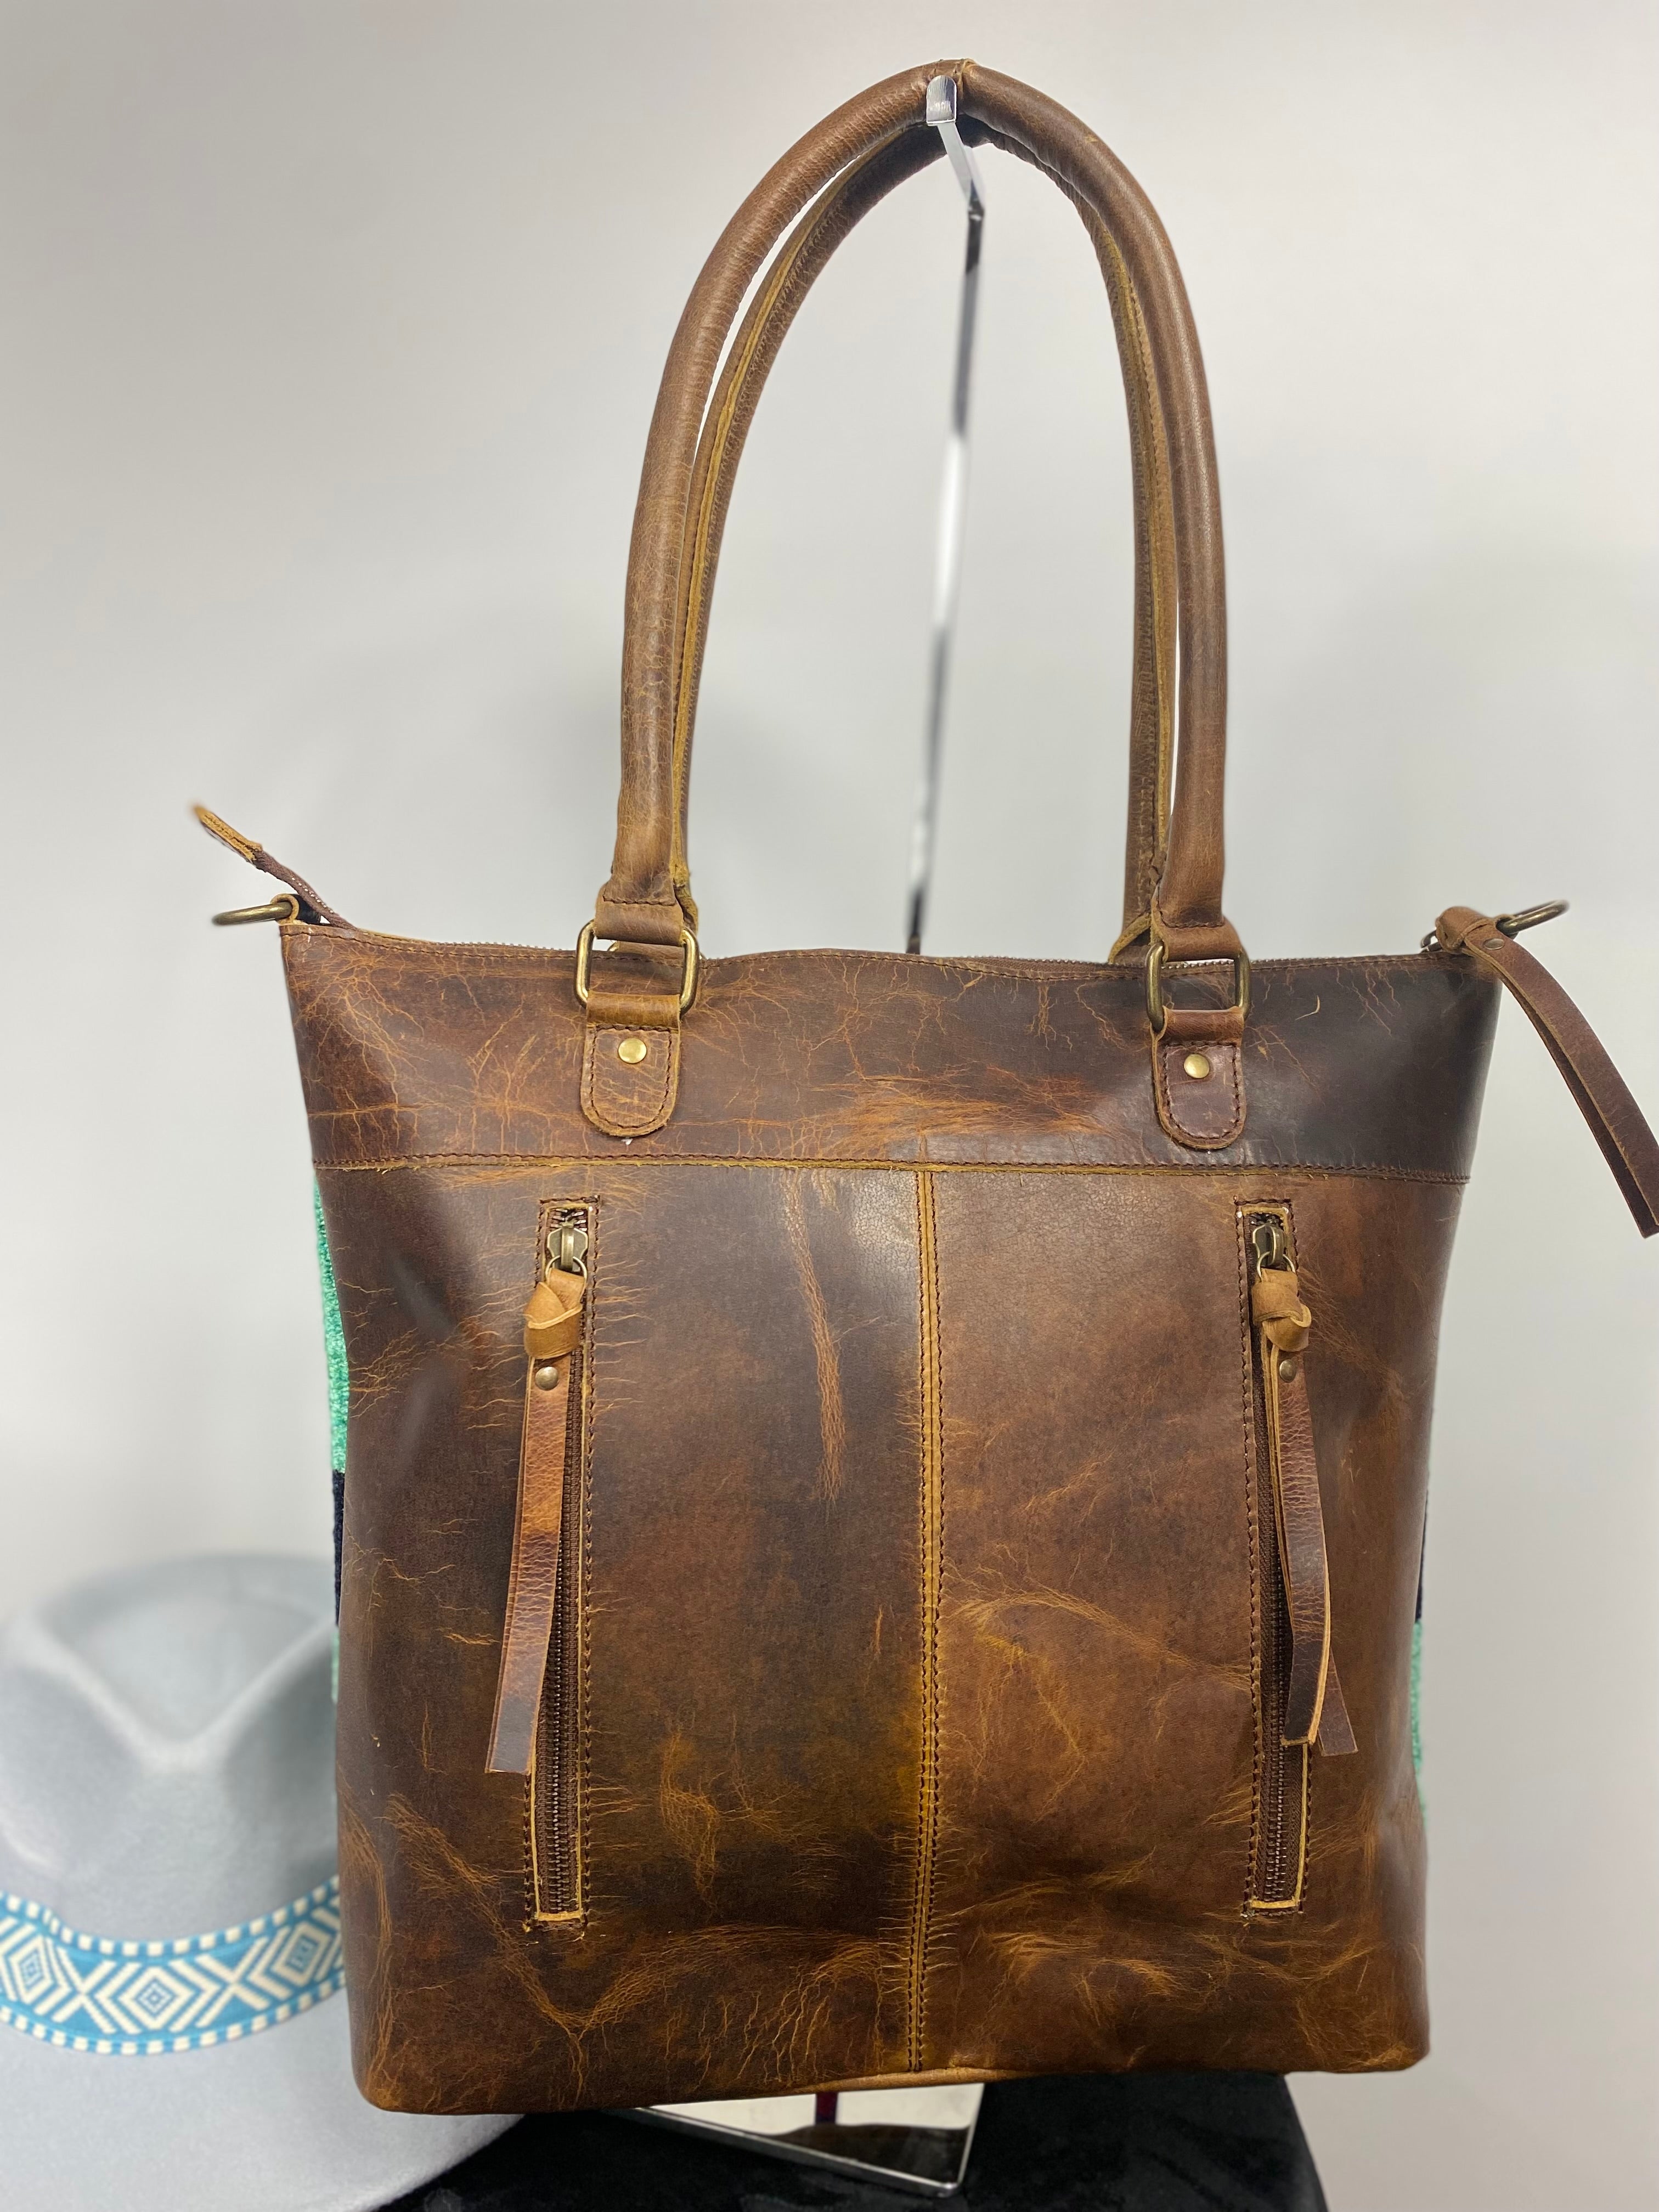 T-1264-3 MontanaCo Aztec With Pure Leather Concealed Carry Tote Bag